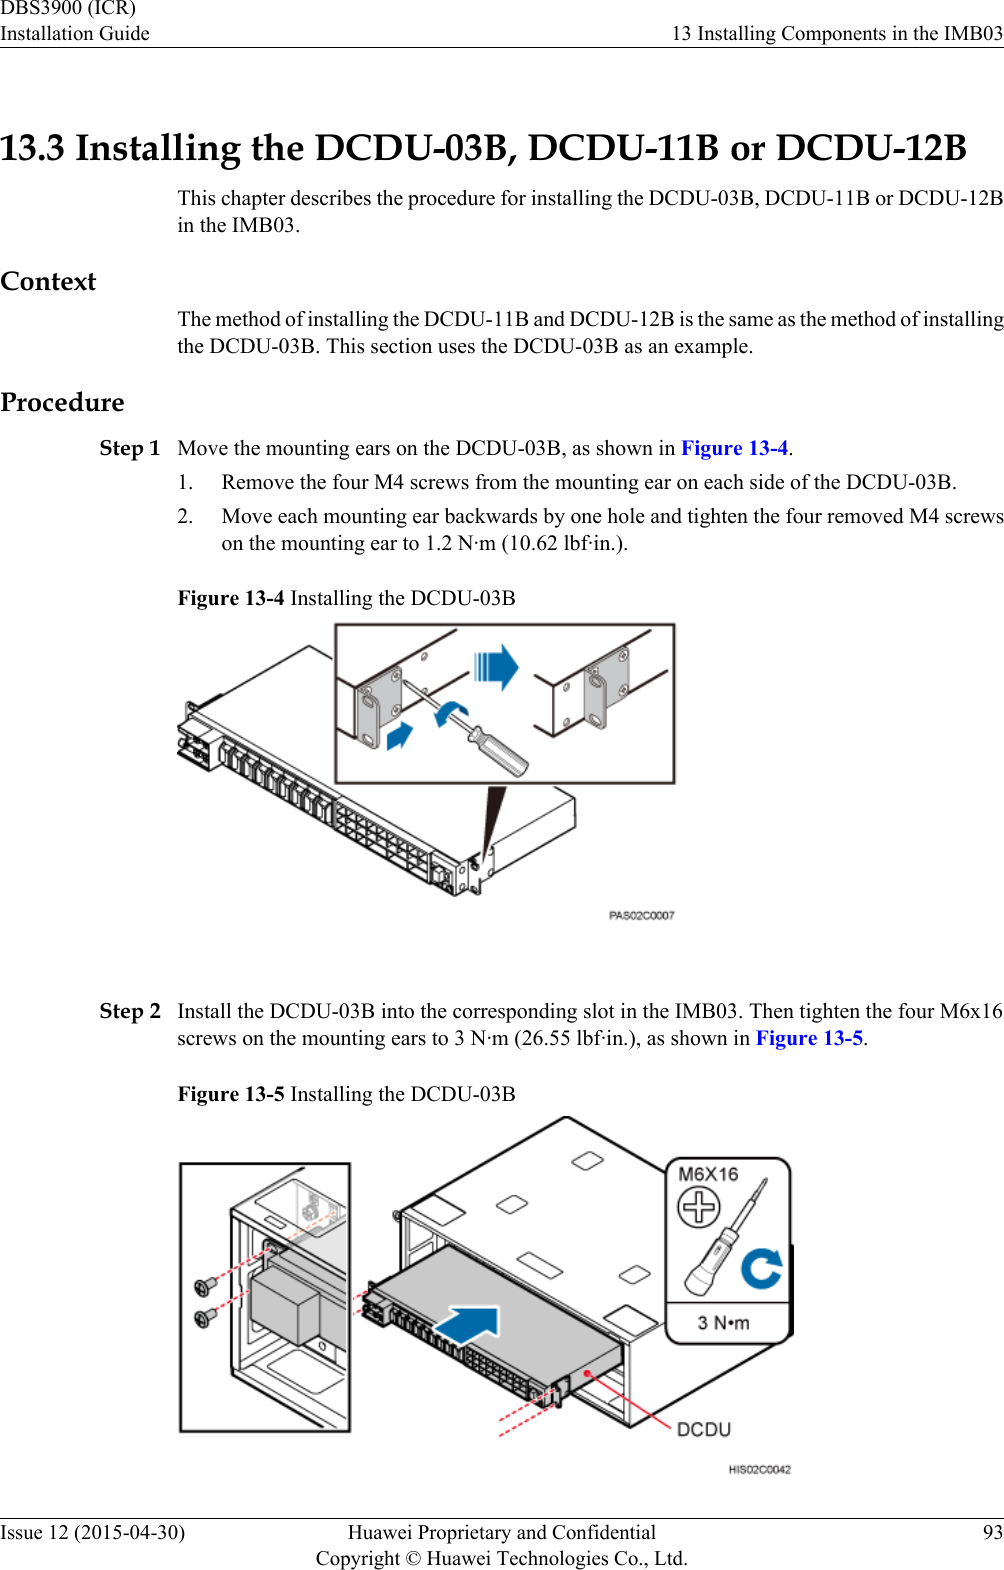 13.3 Installing the DCDU-03B, DCDU-11B or DCDU-12BThis chapter describes the procedure for installing the DCDU-03B, DCDU-11B or DCDU-12Bin the IMB03.ContextThe method of installing the DCDU-11B and DCDU-12B is the same as the method of installingthe DCDU-03B. This section uses the DCDU-03B as an example.ProcedureStep 1 Move the mounting ears on the DCDU-03B, as shown in Figure 13-4.1. Remove the four M4 screws from the mounting ear on each side of the DCDU-03B.2. Move each mounting ear backwards by one hole and tighten the four removed M4 screwson the mounting ear to 1.2 N·m (10.62 lbf·in.).Figure 13-4 Installing the DCDU-03B Step 2 Install the DCDU-03B into the corresponding slot in the IMB03. Then tighten the four M6x16screws on the mounting ears to 3 N·m (26.55 lbf·in.), as shown in Figure 13-5.Figure 13-5 Installing the DCDU-03BDBS3900 (ICR)Installation Guide 13 Installing Components in the IMB03Issue 12 (2015-04-30) Huawei Proprietary and ConfidentialCopyright © Huawei Technologies Co., Ltd.93